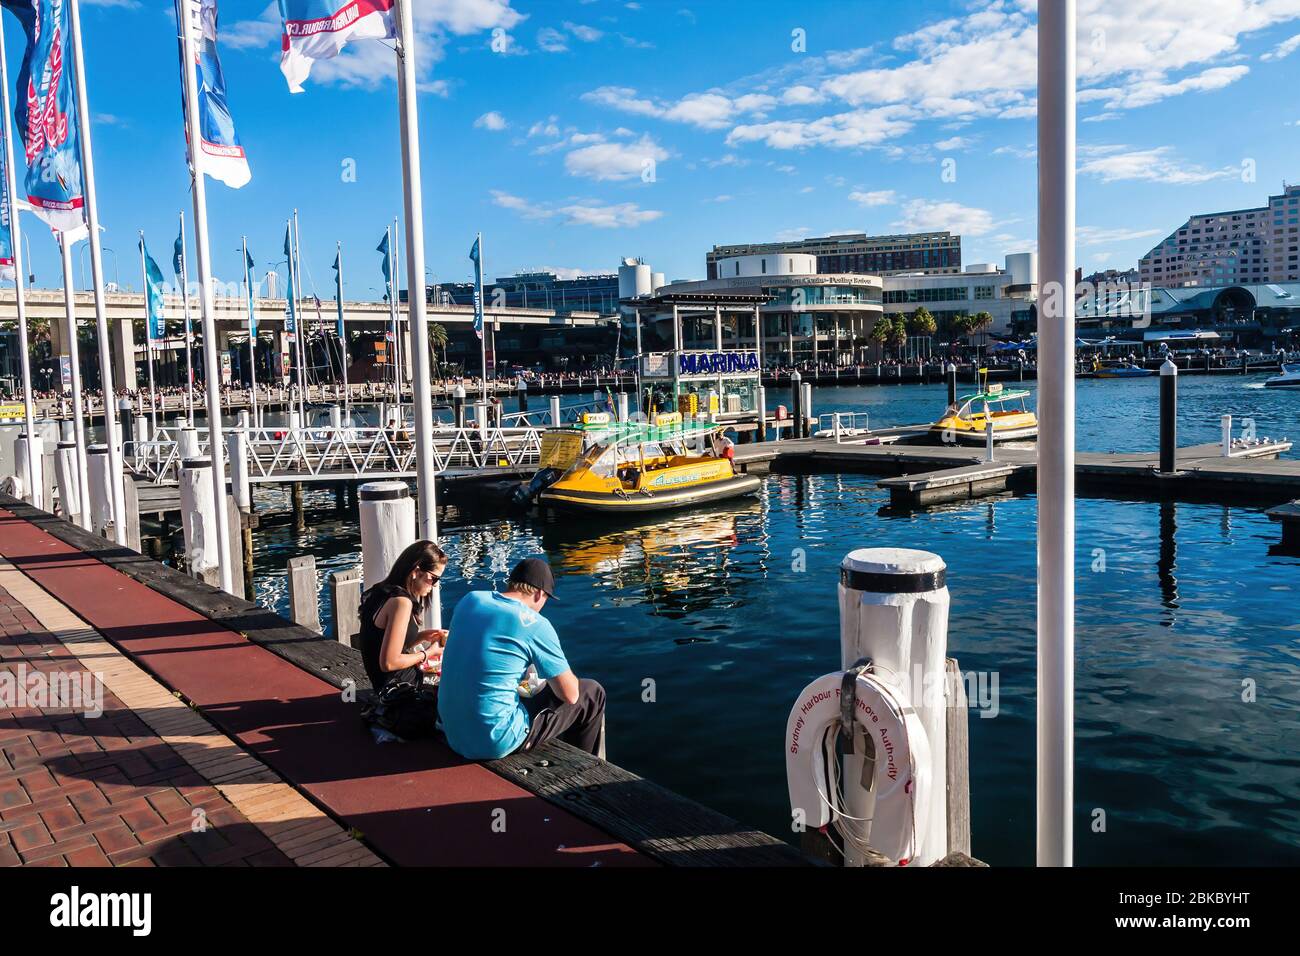 Sydney, Australia - July 3, 2011: Darling Harbour and water taxis at the marina on a sunny day Stock Photo